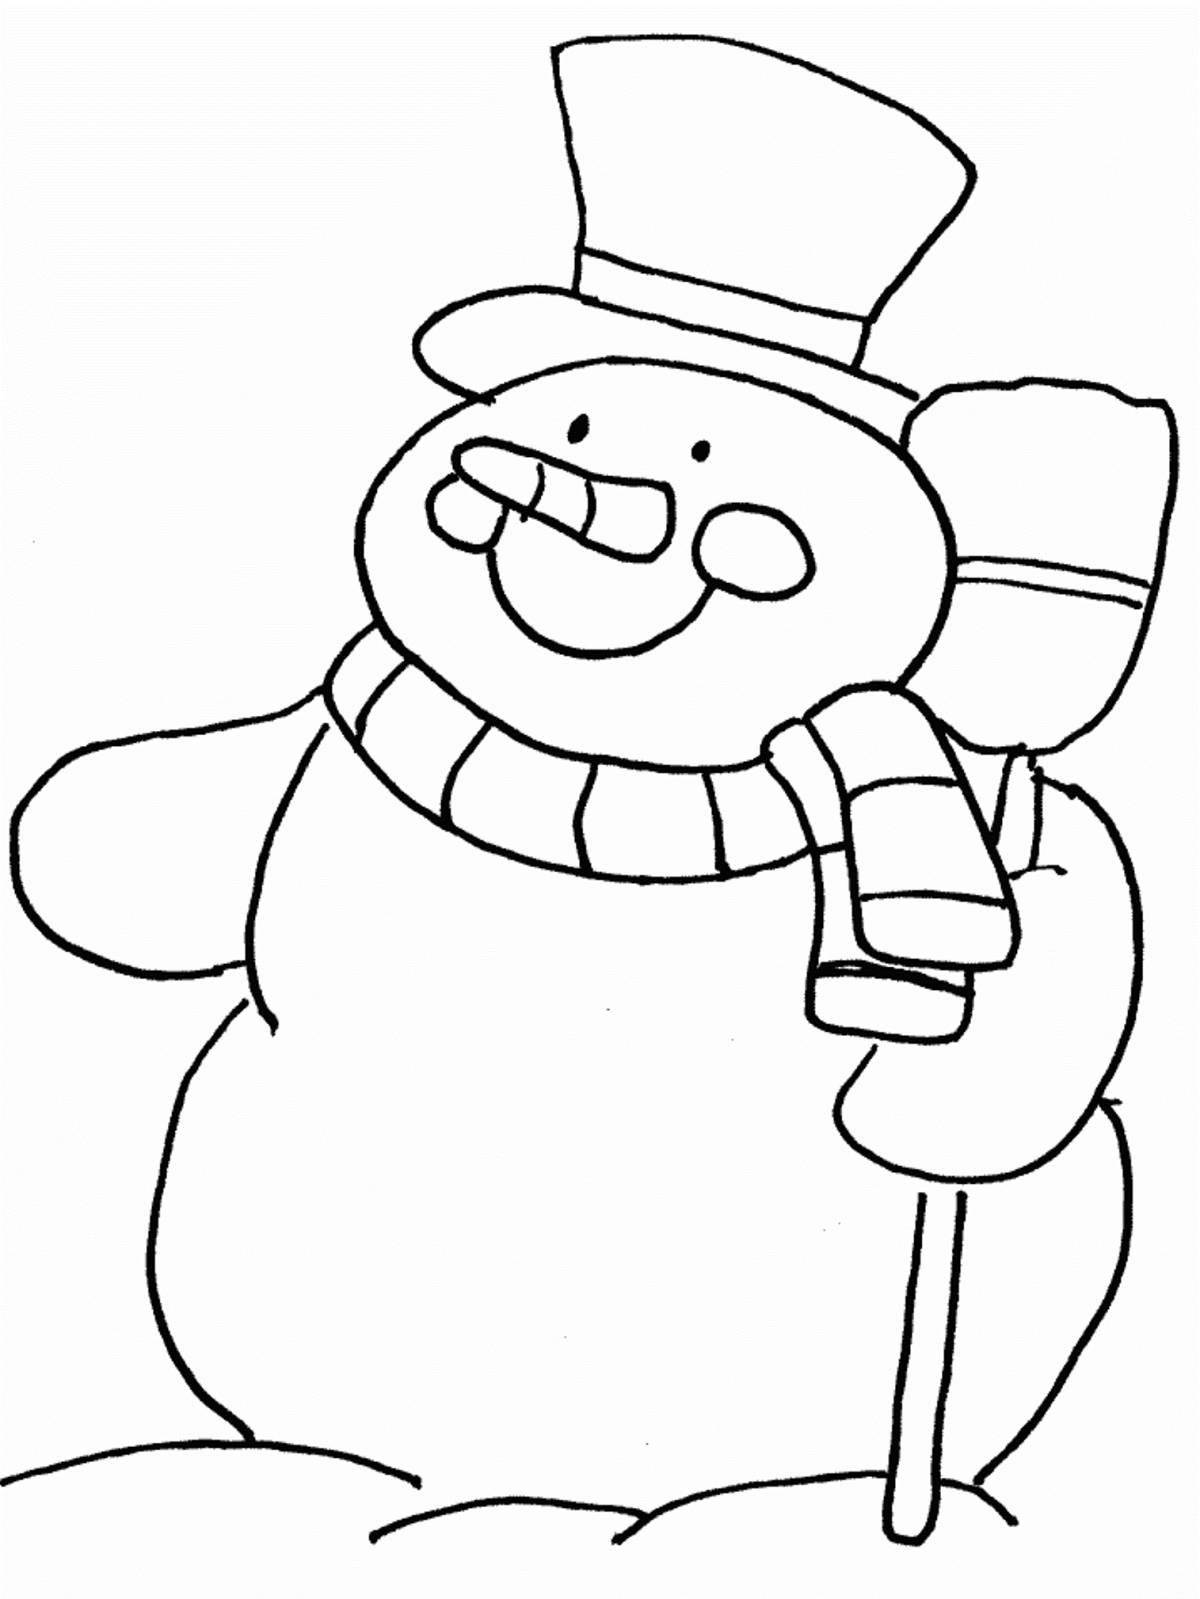 Bright coloring snowman for kids 2 3